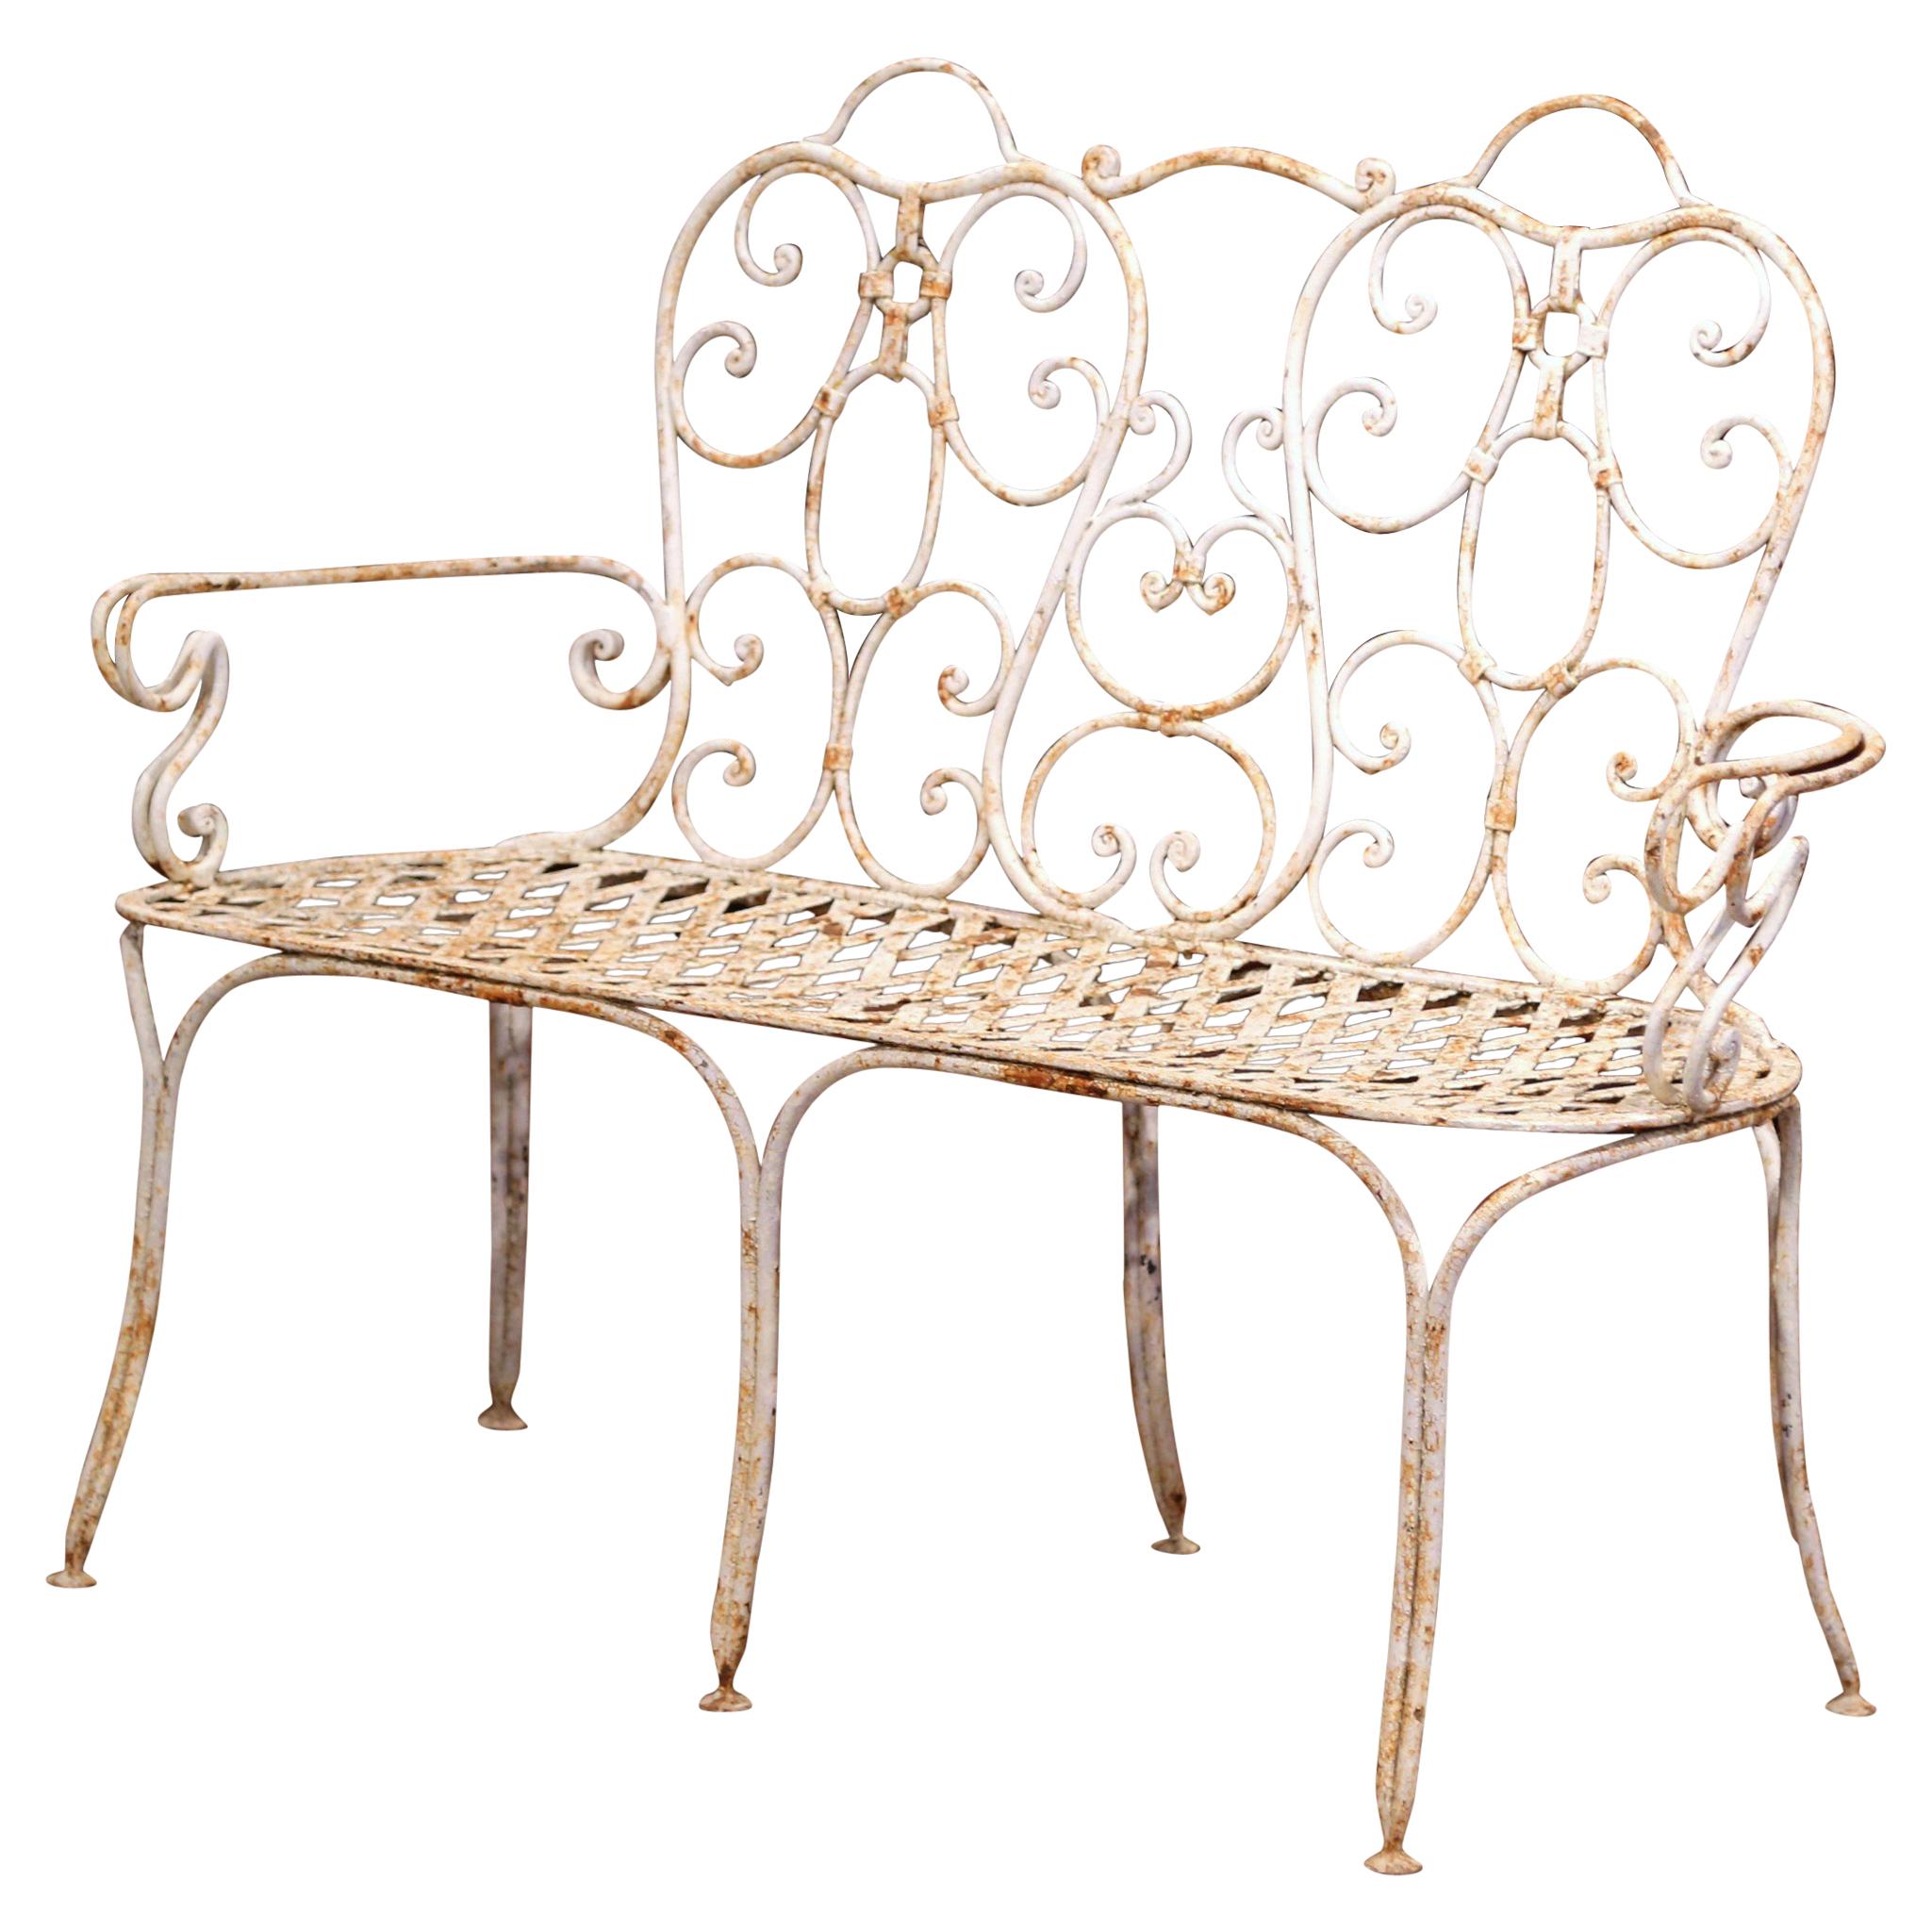 19th Century French Scroll Painted Iron Six-Leg Garden Bench from Normandy